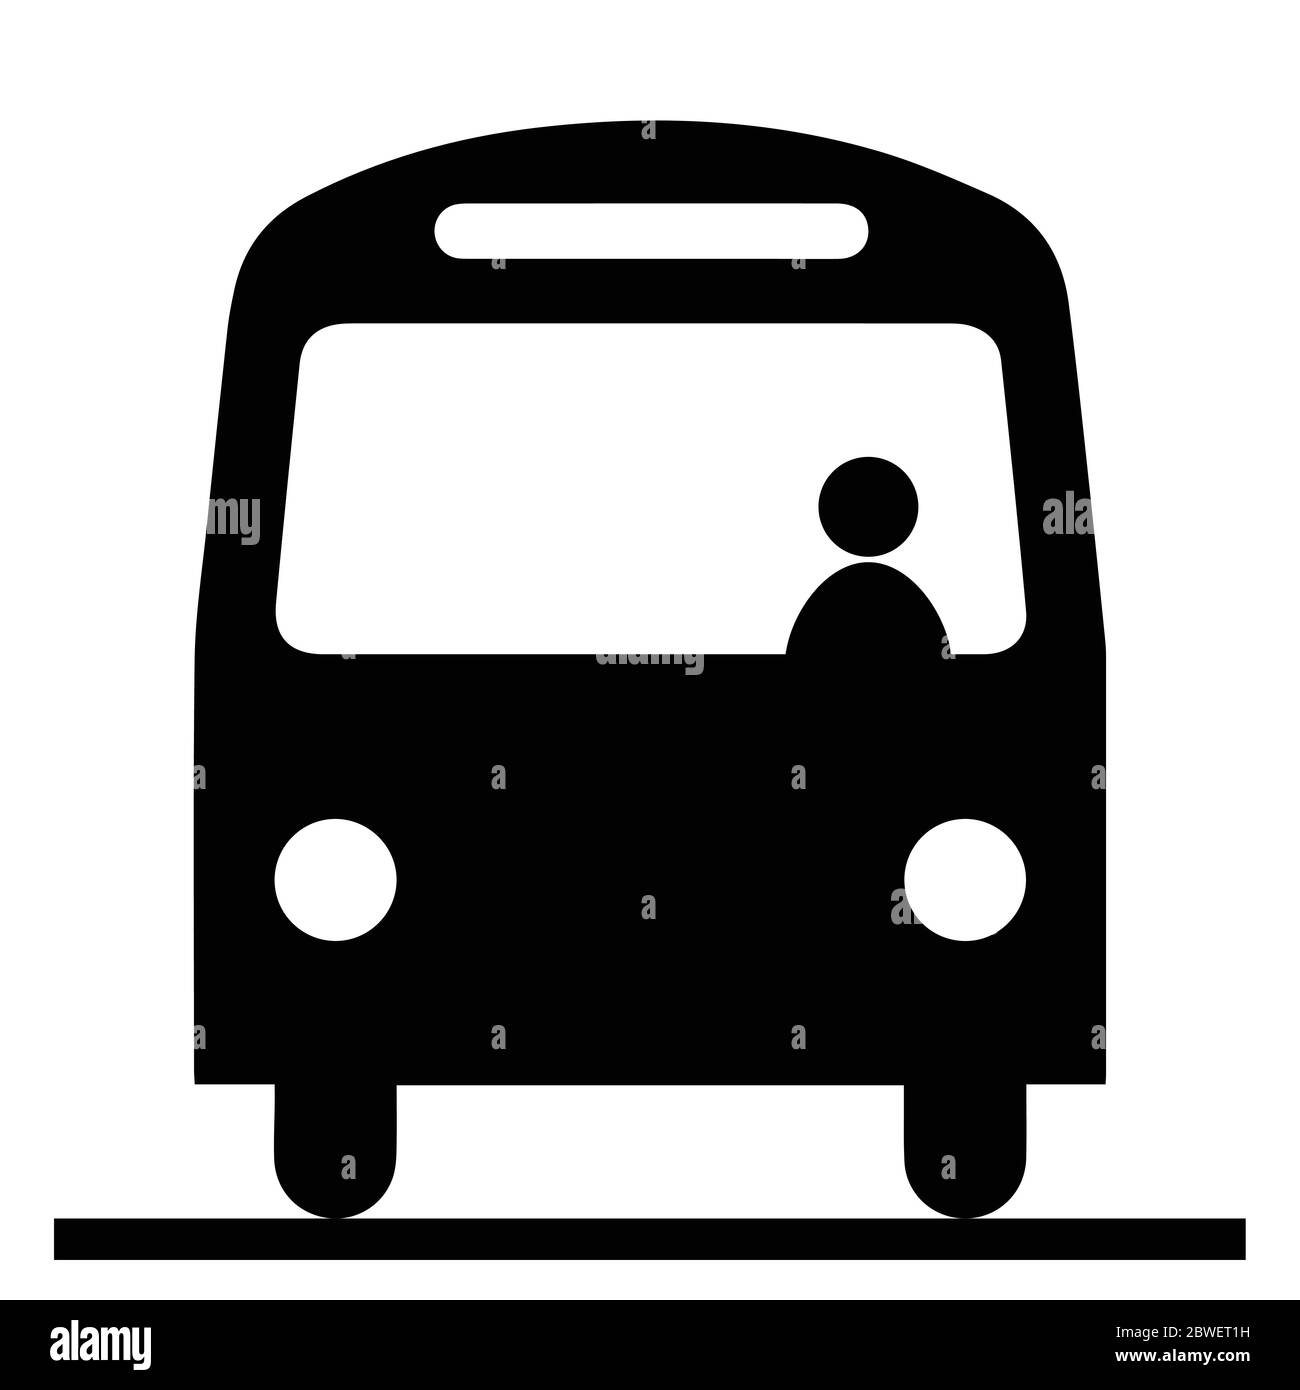 Bus Front View With Driver Conductor. Black and Whie Pictogram Illustration Icon Vector EPS File. Stock Vector